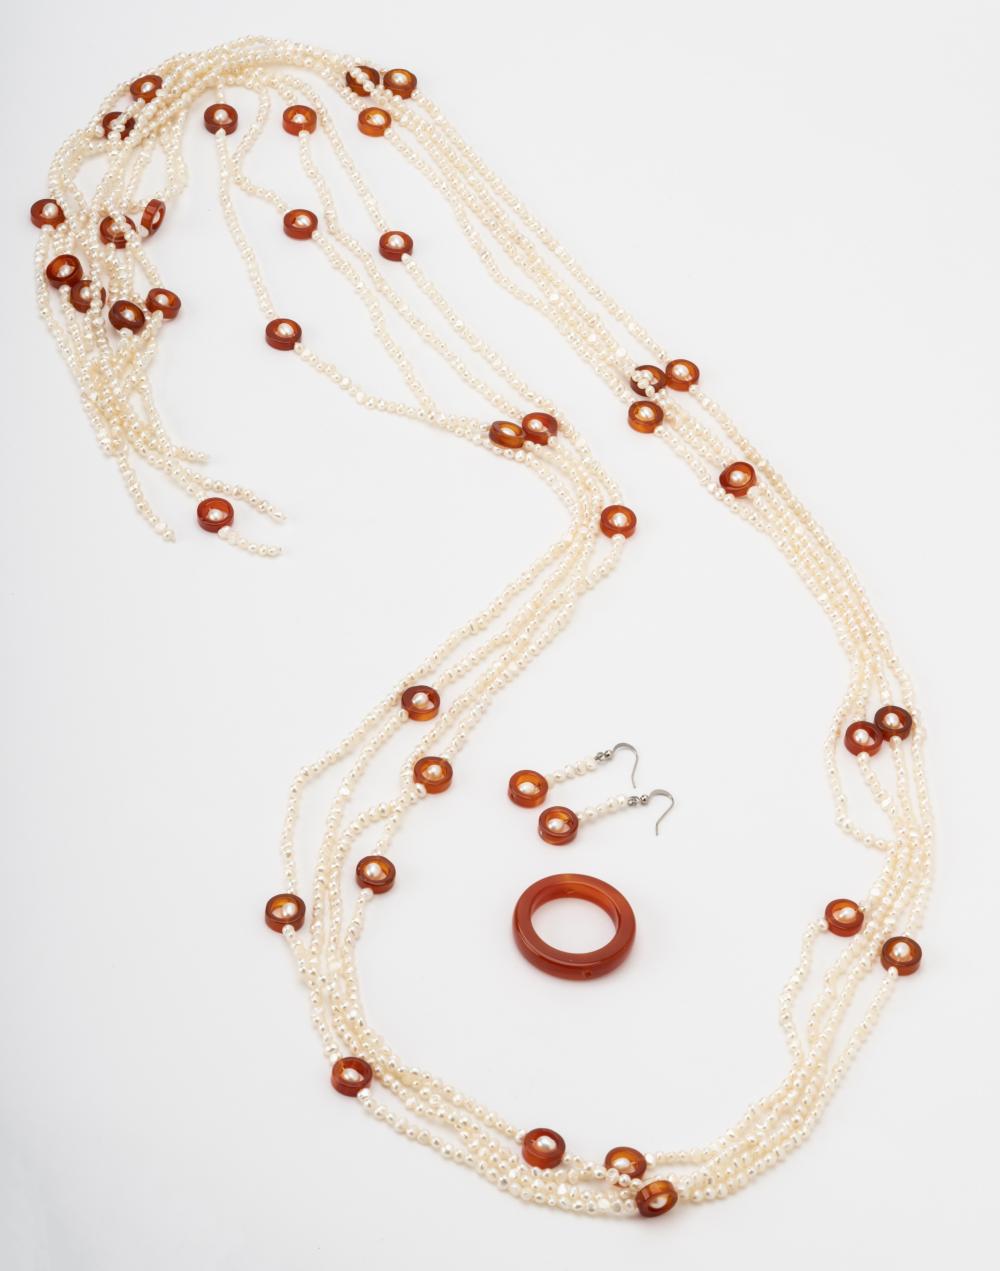 CARNELIAN AND FRESHWATER CULTURED 301638